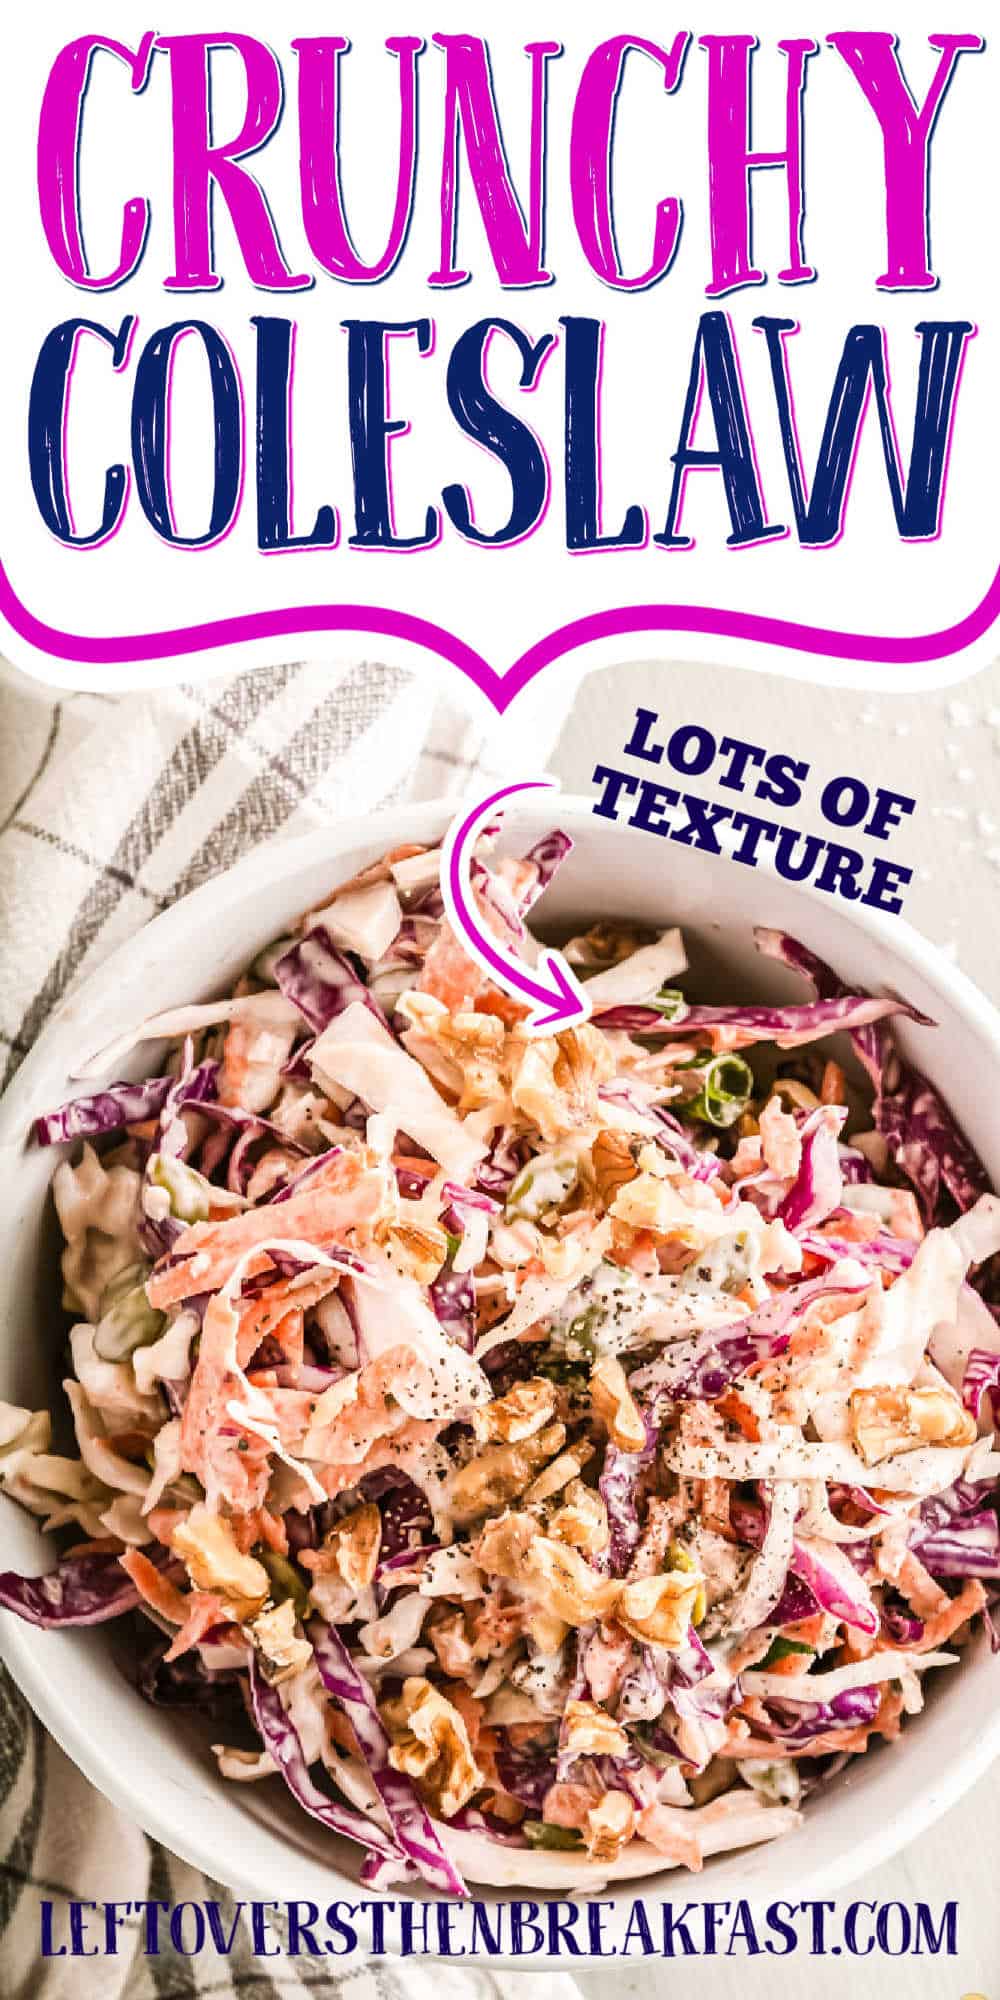 slaw with text "crunchy coleslaw"